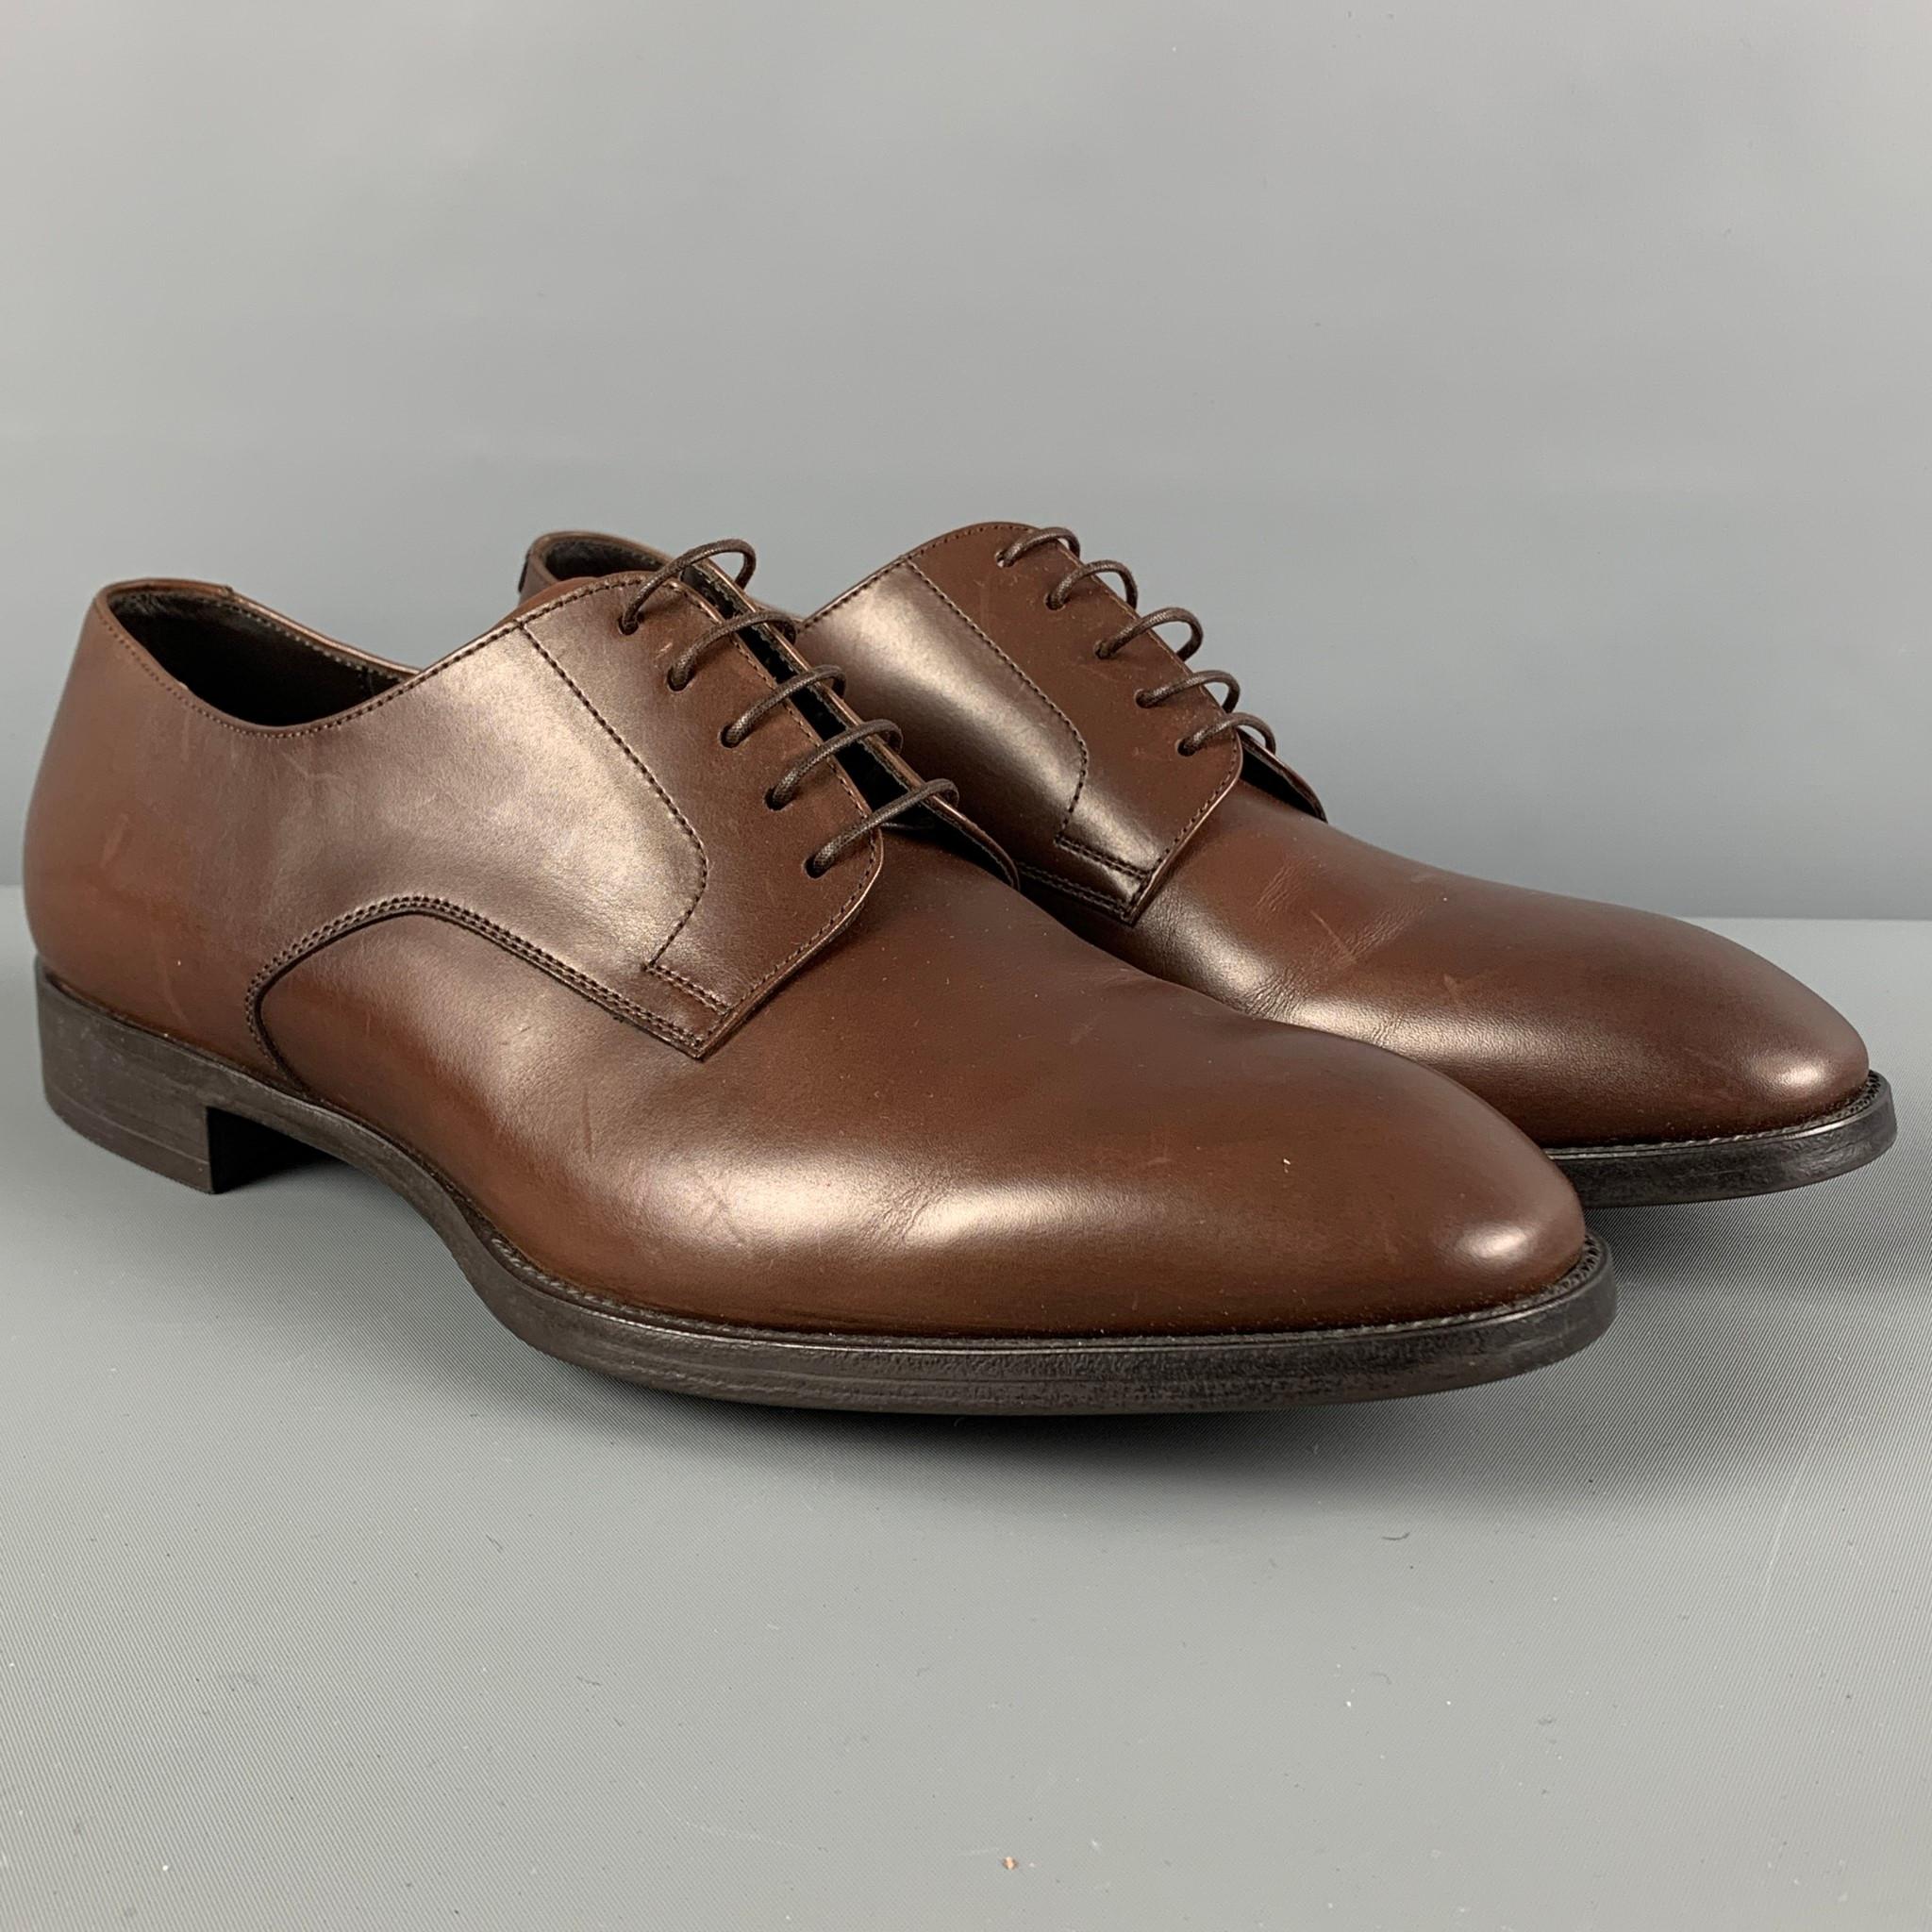 GIORGIO ARMANI shoes comes in a brown leather featuring a classic style and a lace up closure. Made in Italy. 

Very Good Pre-Owned Condition.
Marked: X2C536 9

Outsole: 12 in. x 4.25 in.